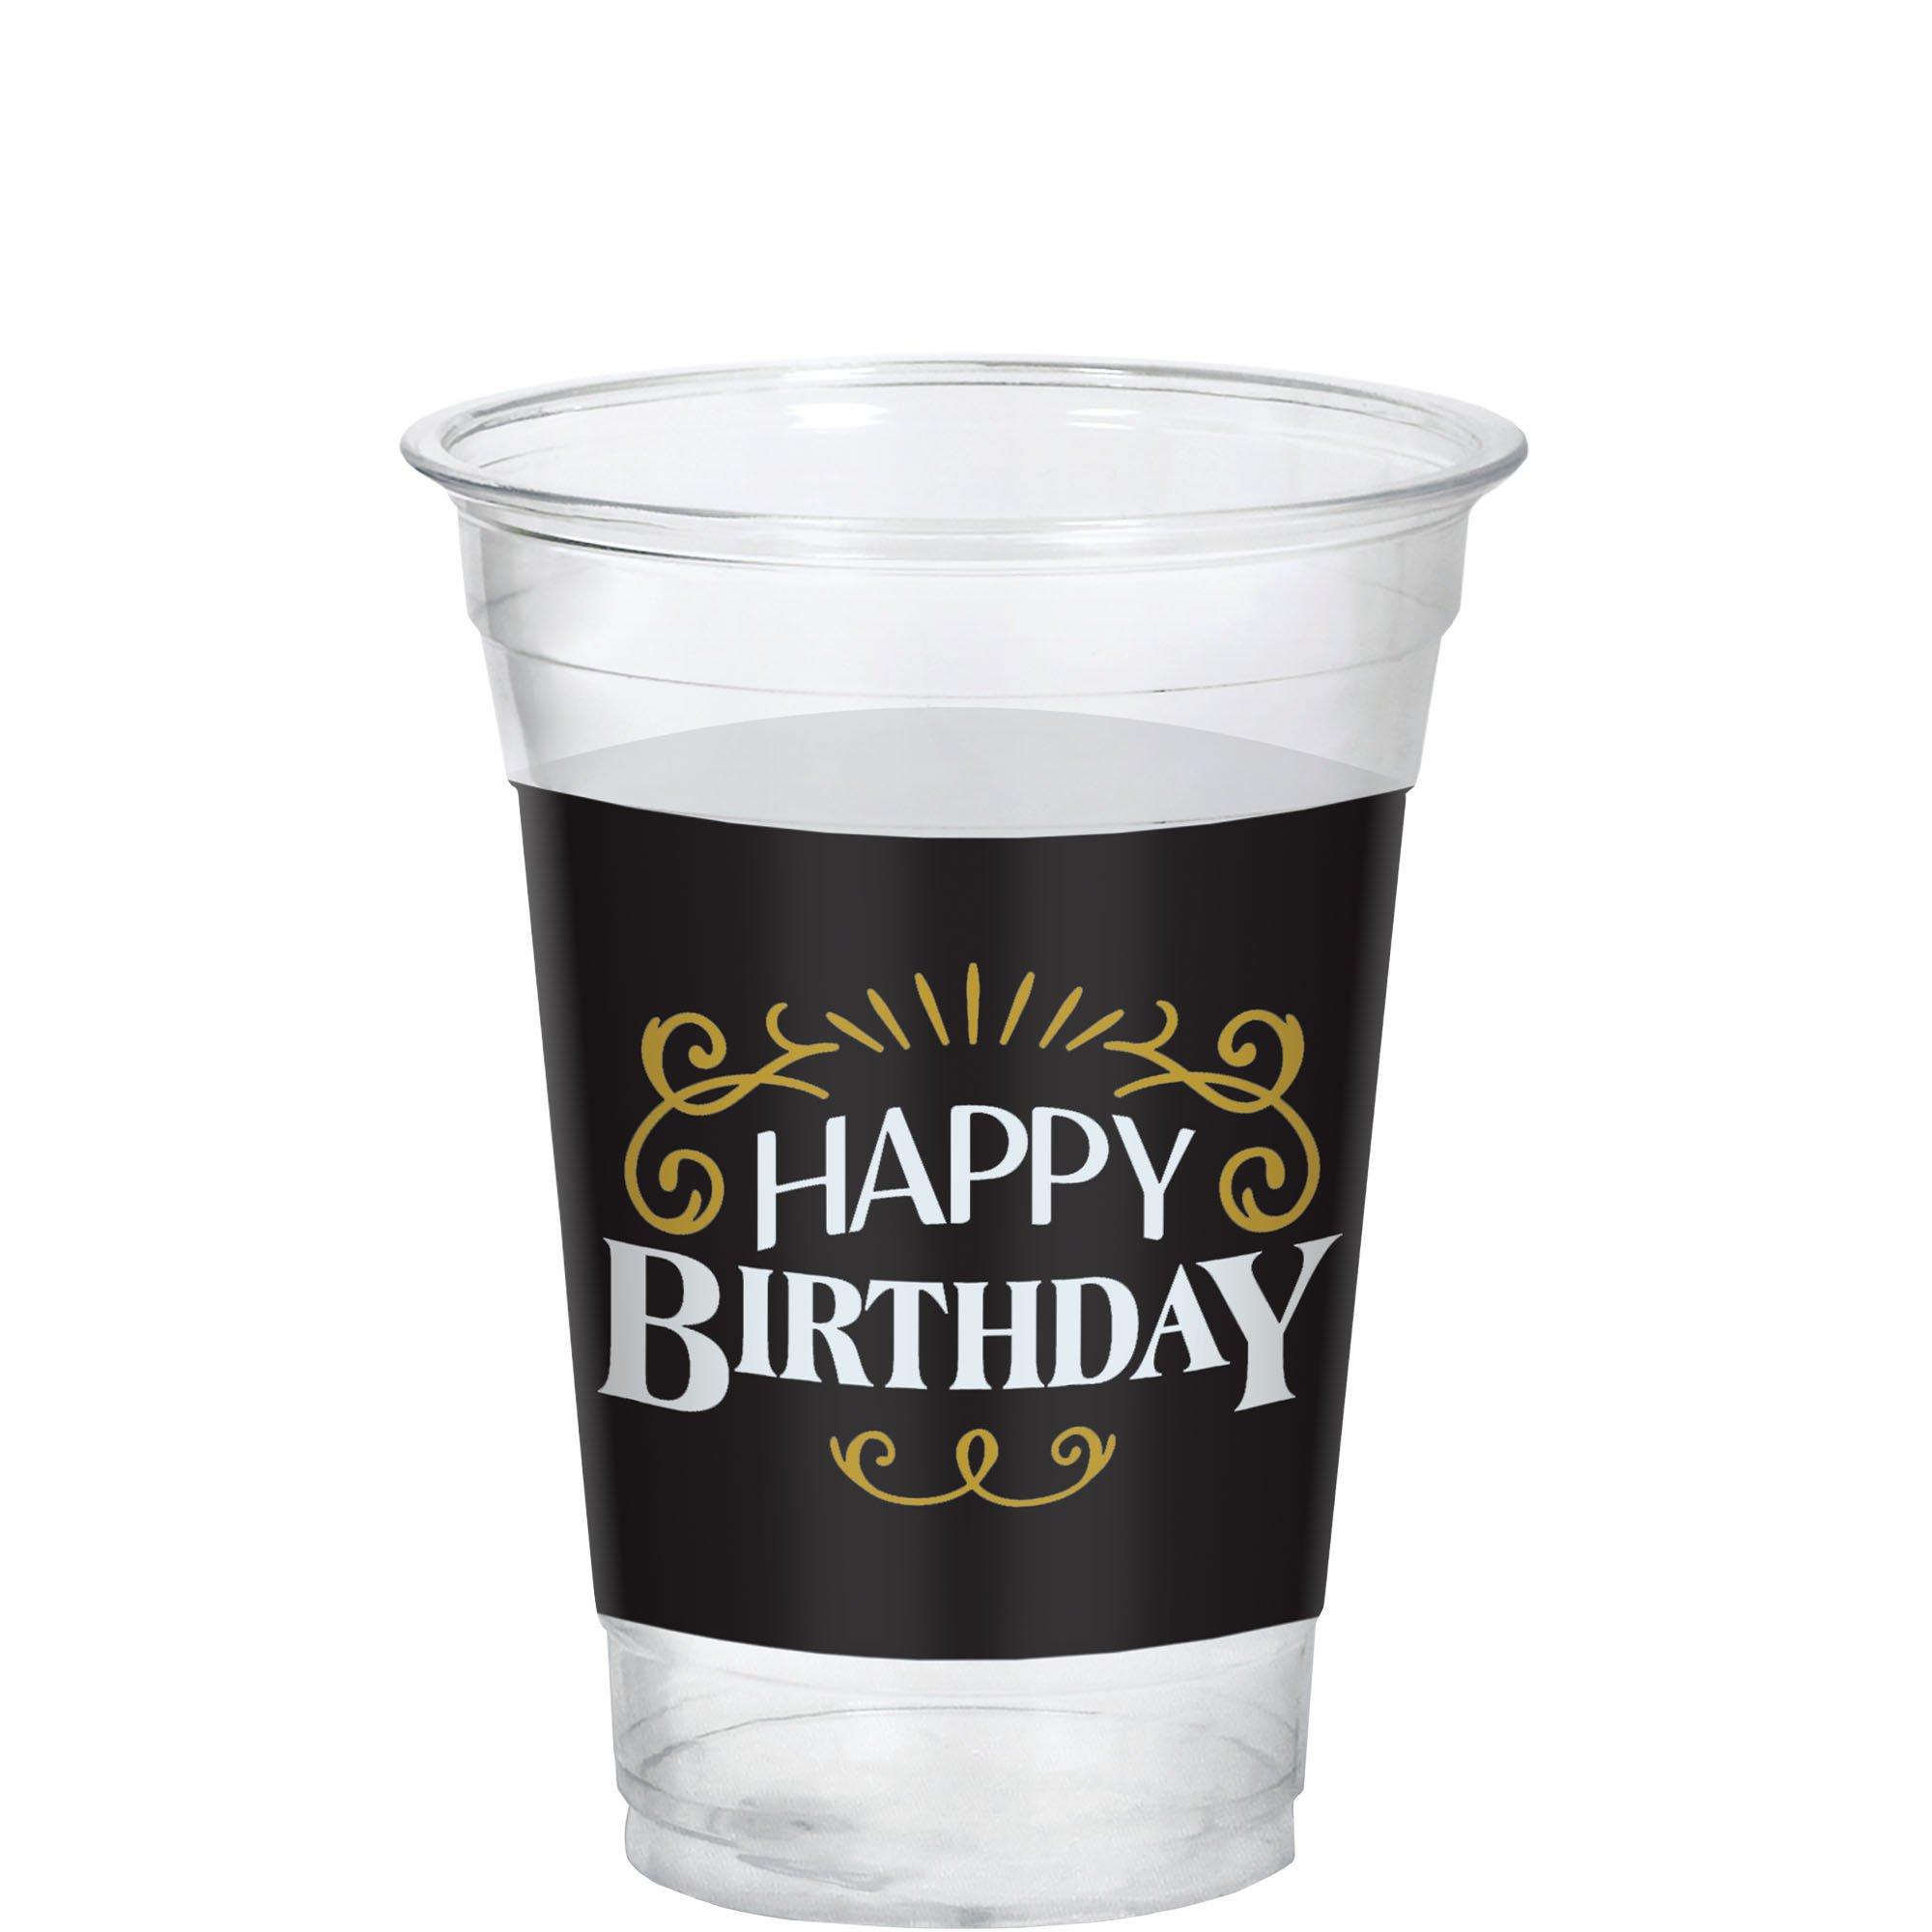 Drinkware Classic Oldstyle Giant Plastic Cup — GreekU